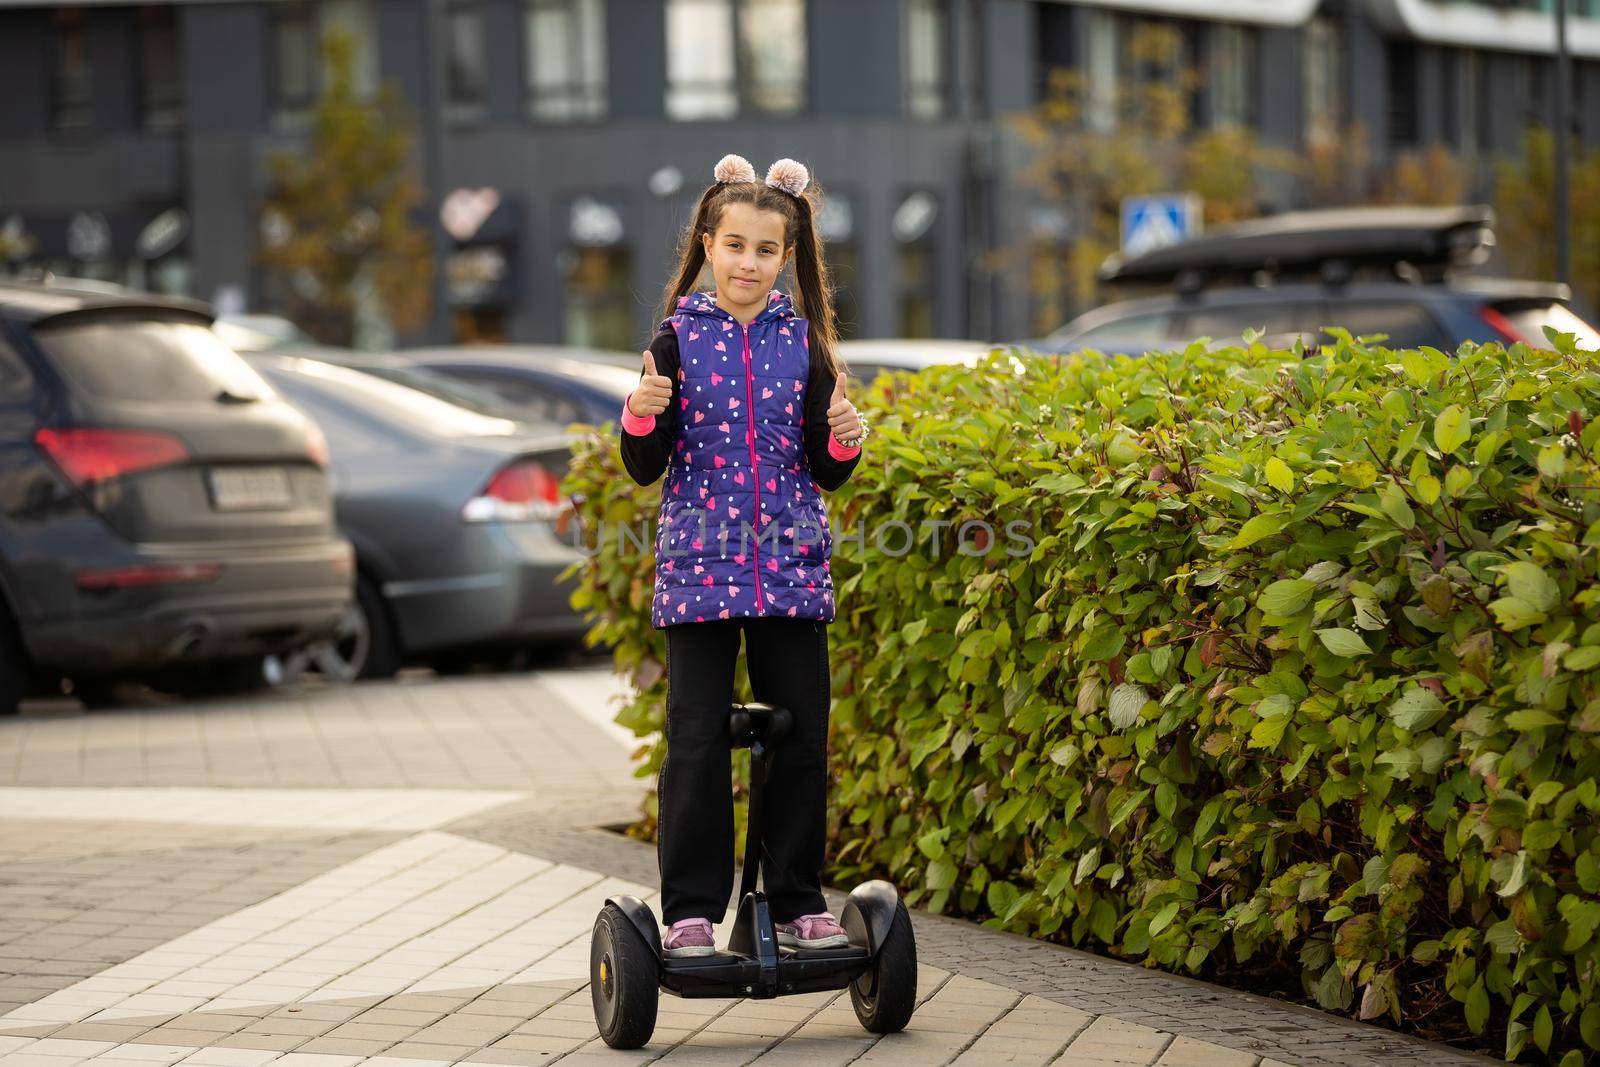 Happy little girl standing on electric scooter outdoor.